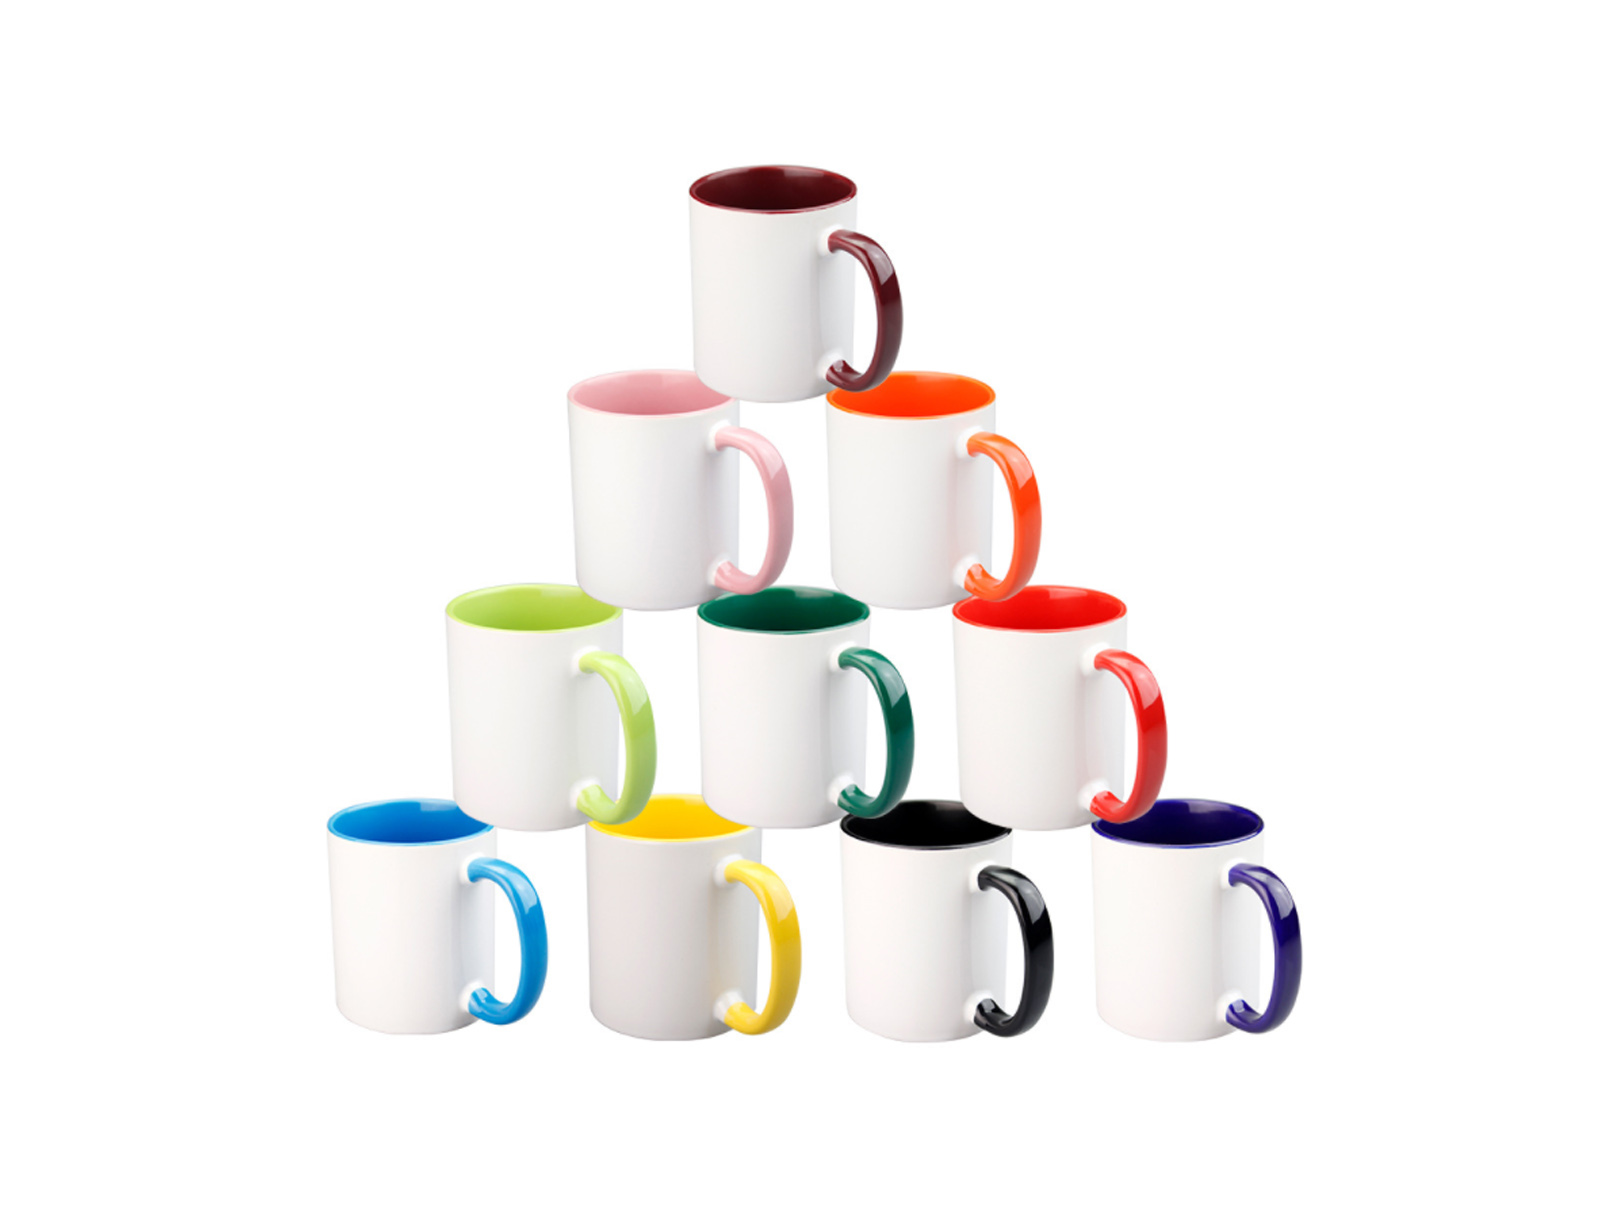 Corporate Gifts Suppliers and Promotional Gifts Dubai| Mugs and T-shirt Printing in Dubai